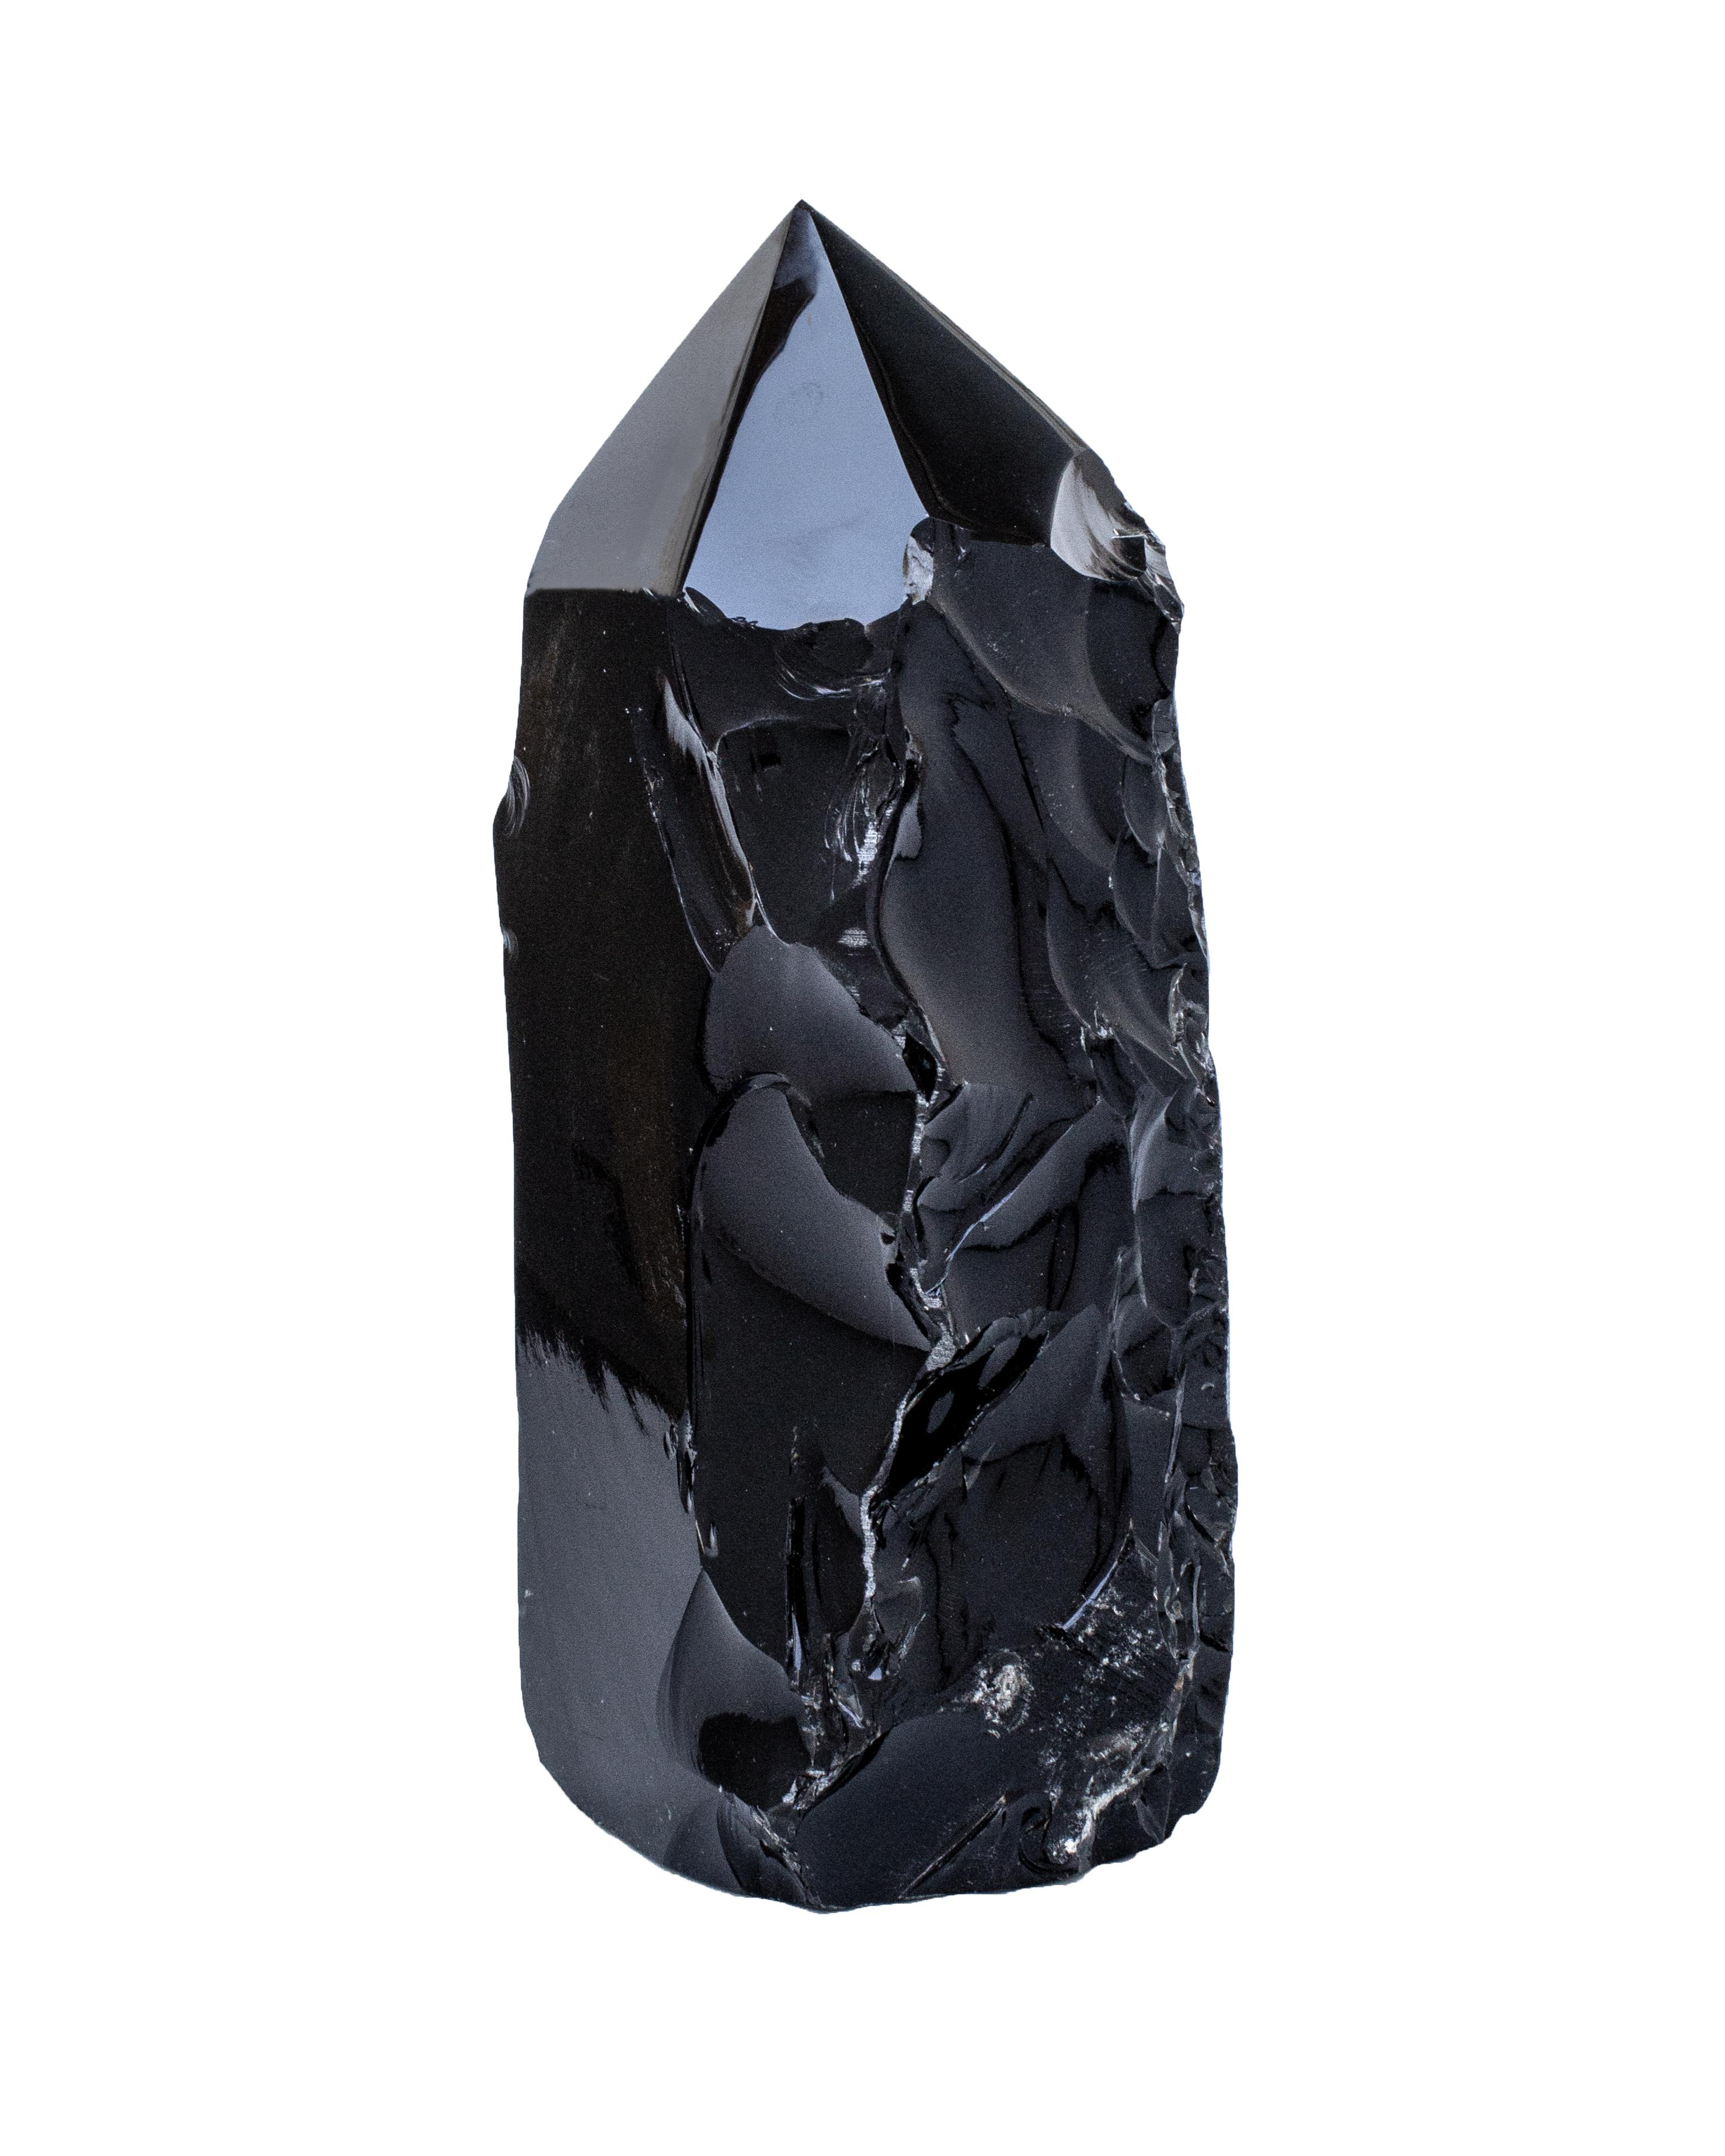 Organic Modern Polished Free-Forming Black Obsidian Point with Natural Forming Indentions For Sale